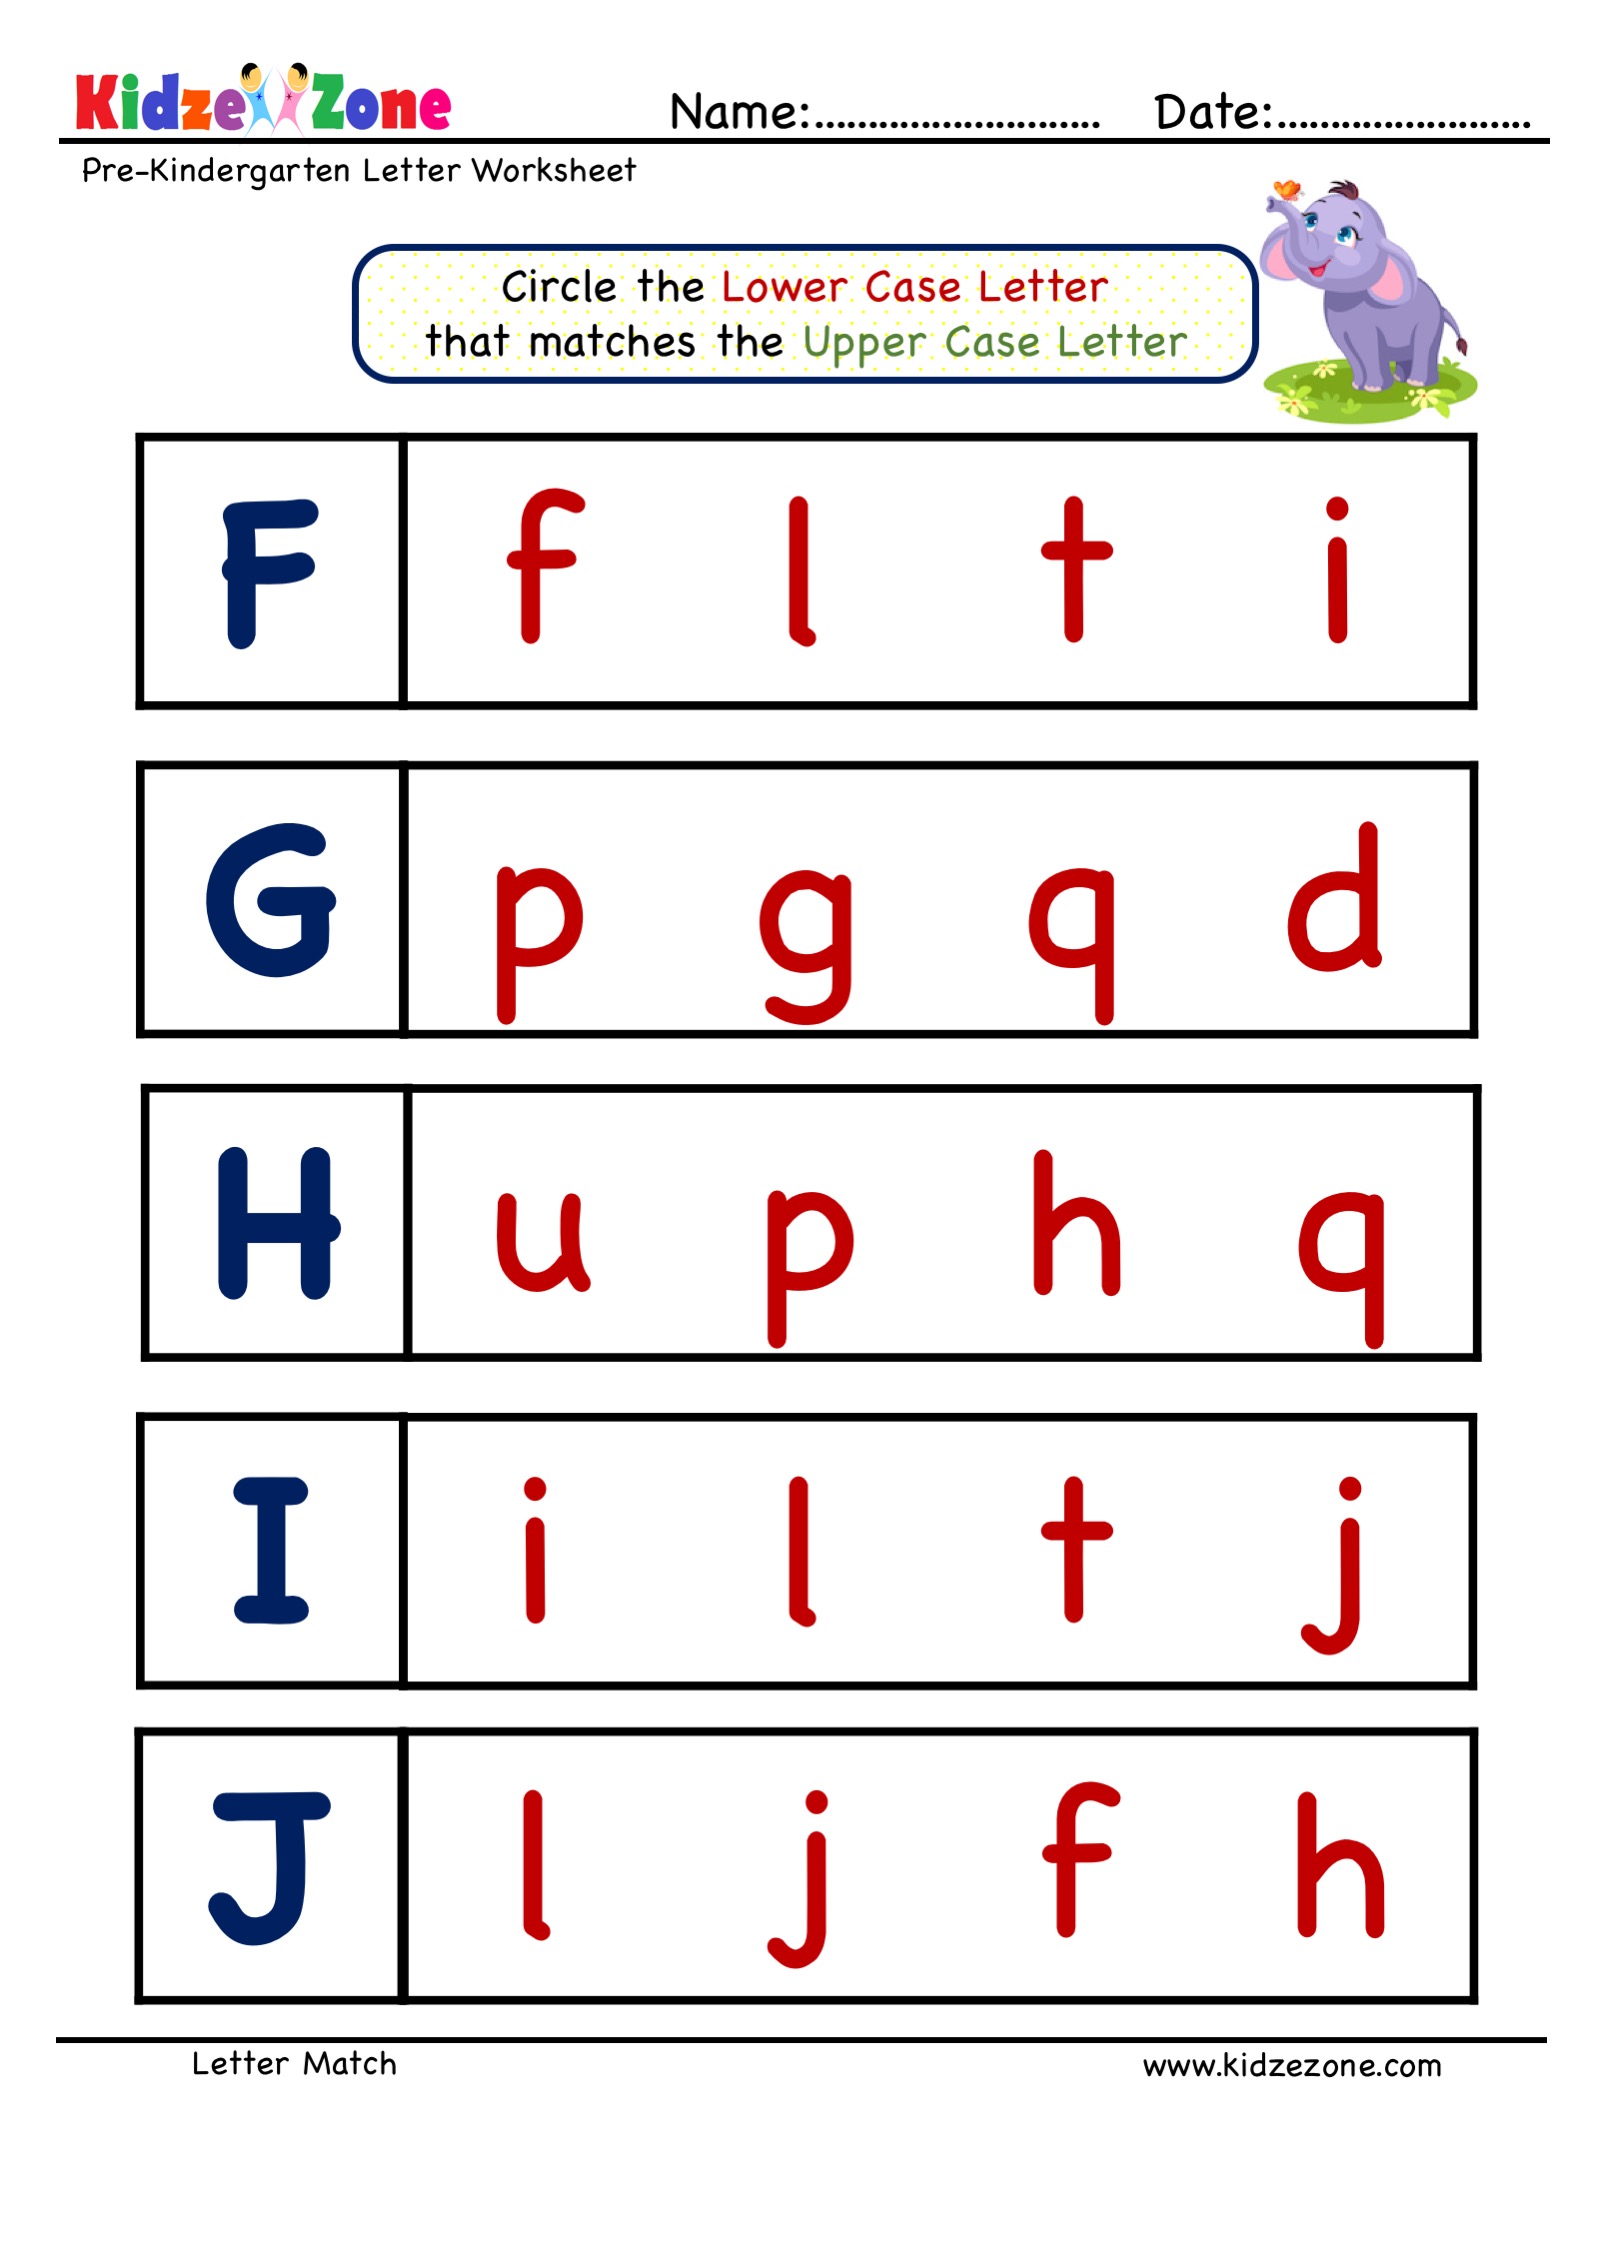 prek letter matching exercise upper case to lower case